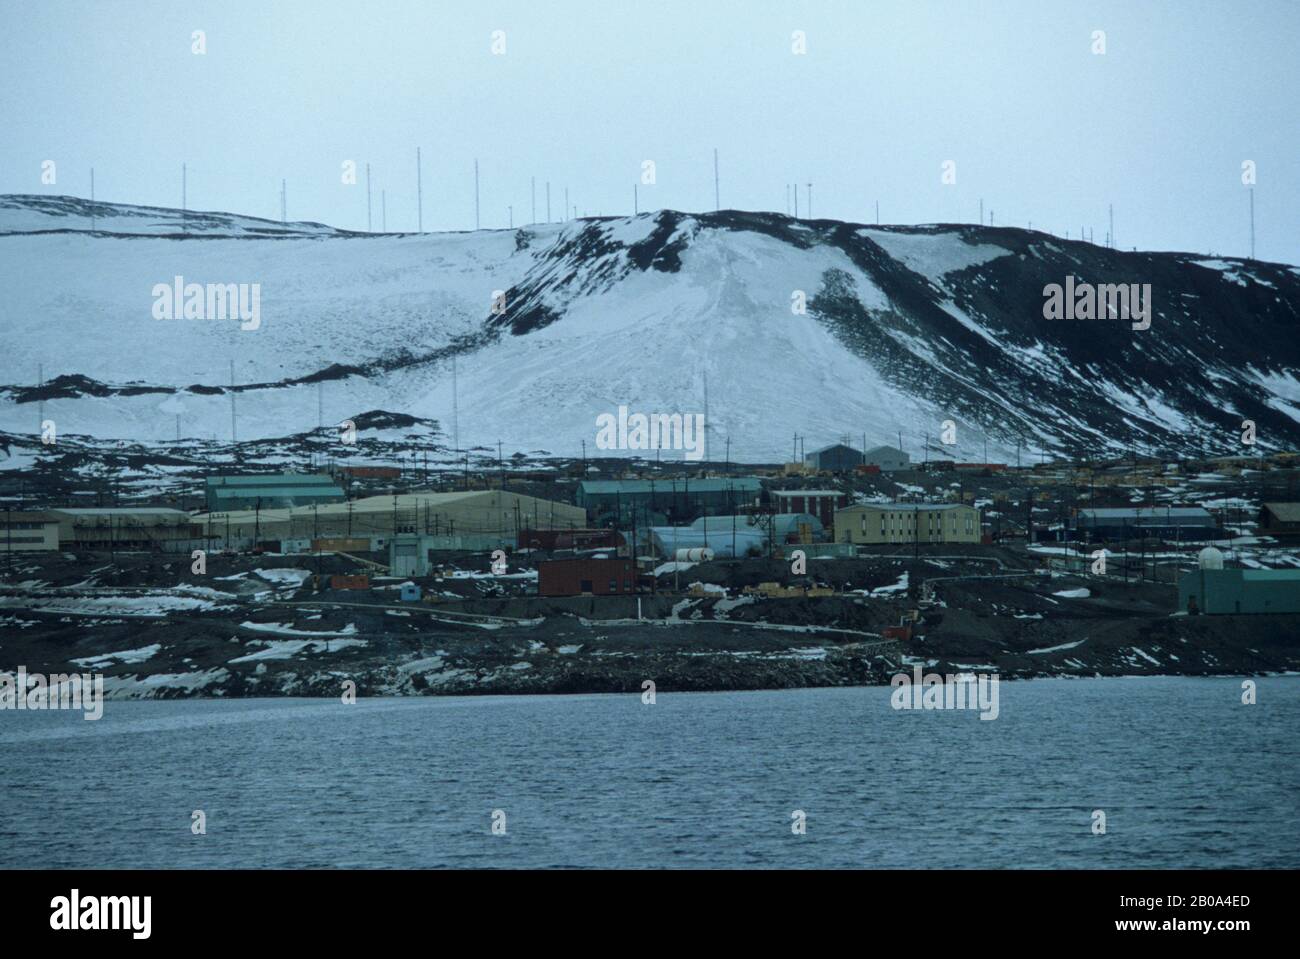 ANTARCTICA, VIEW OF MCMURDO RESEARCH STATION FROM SEA Stock Photo